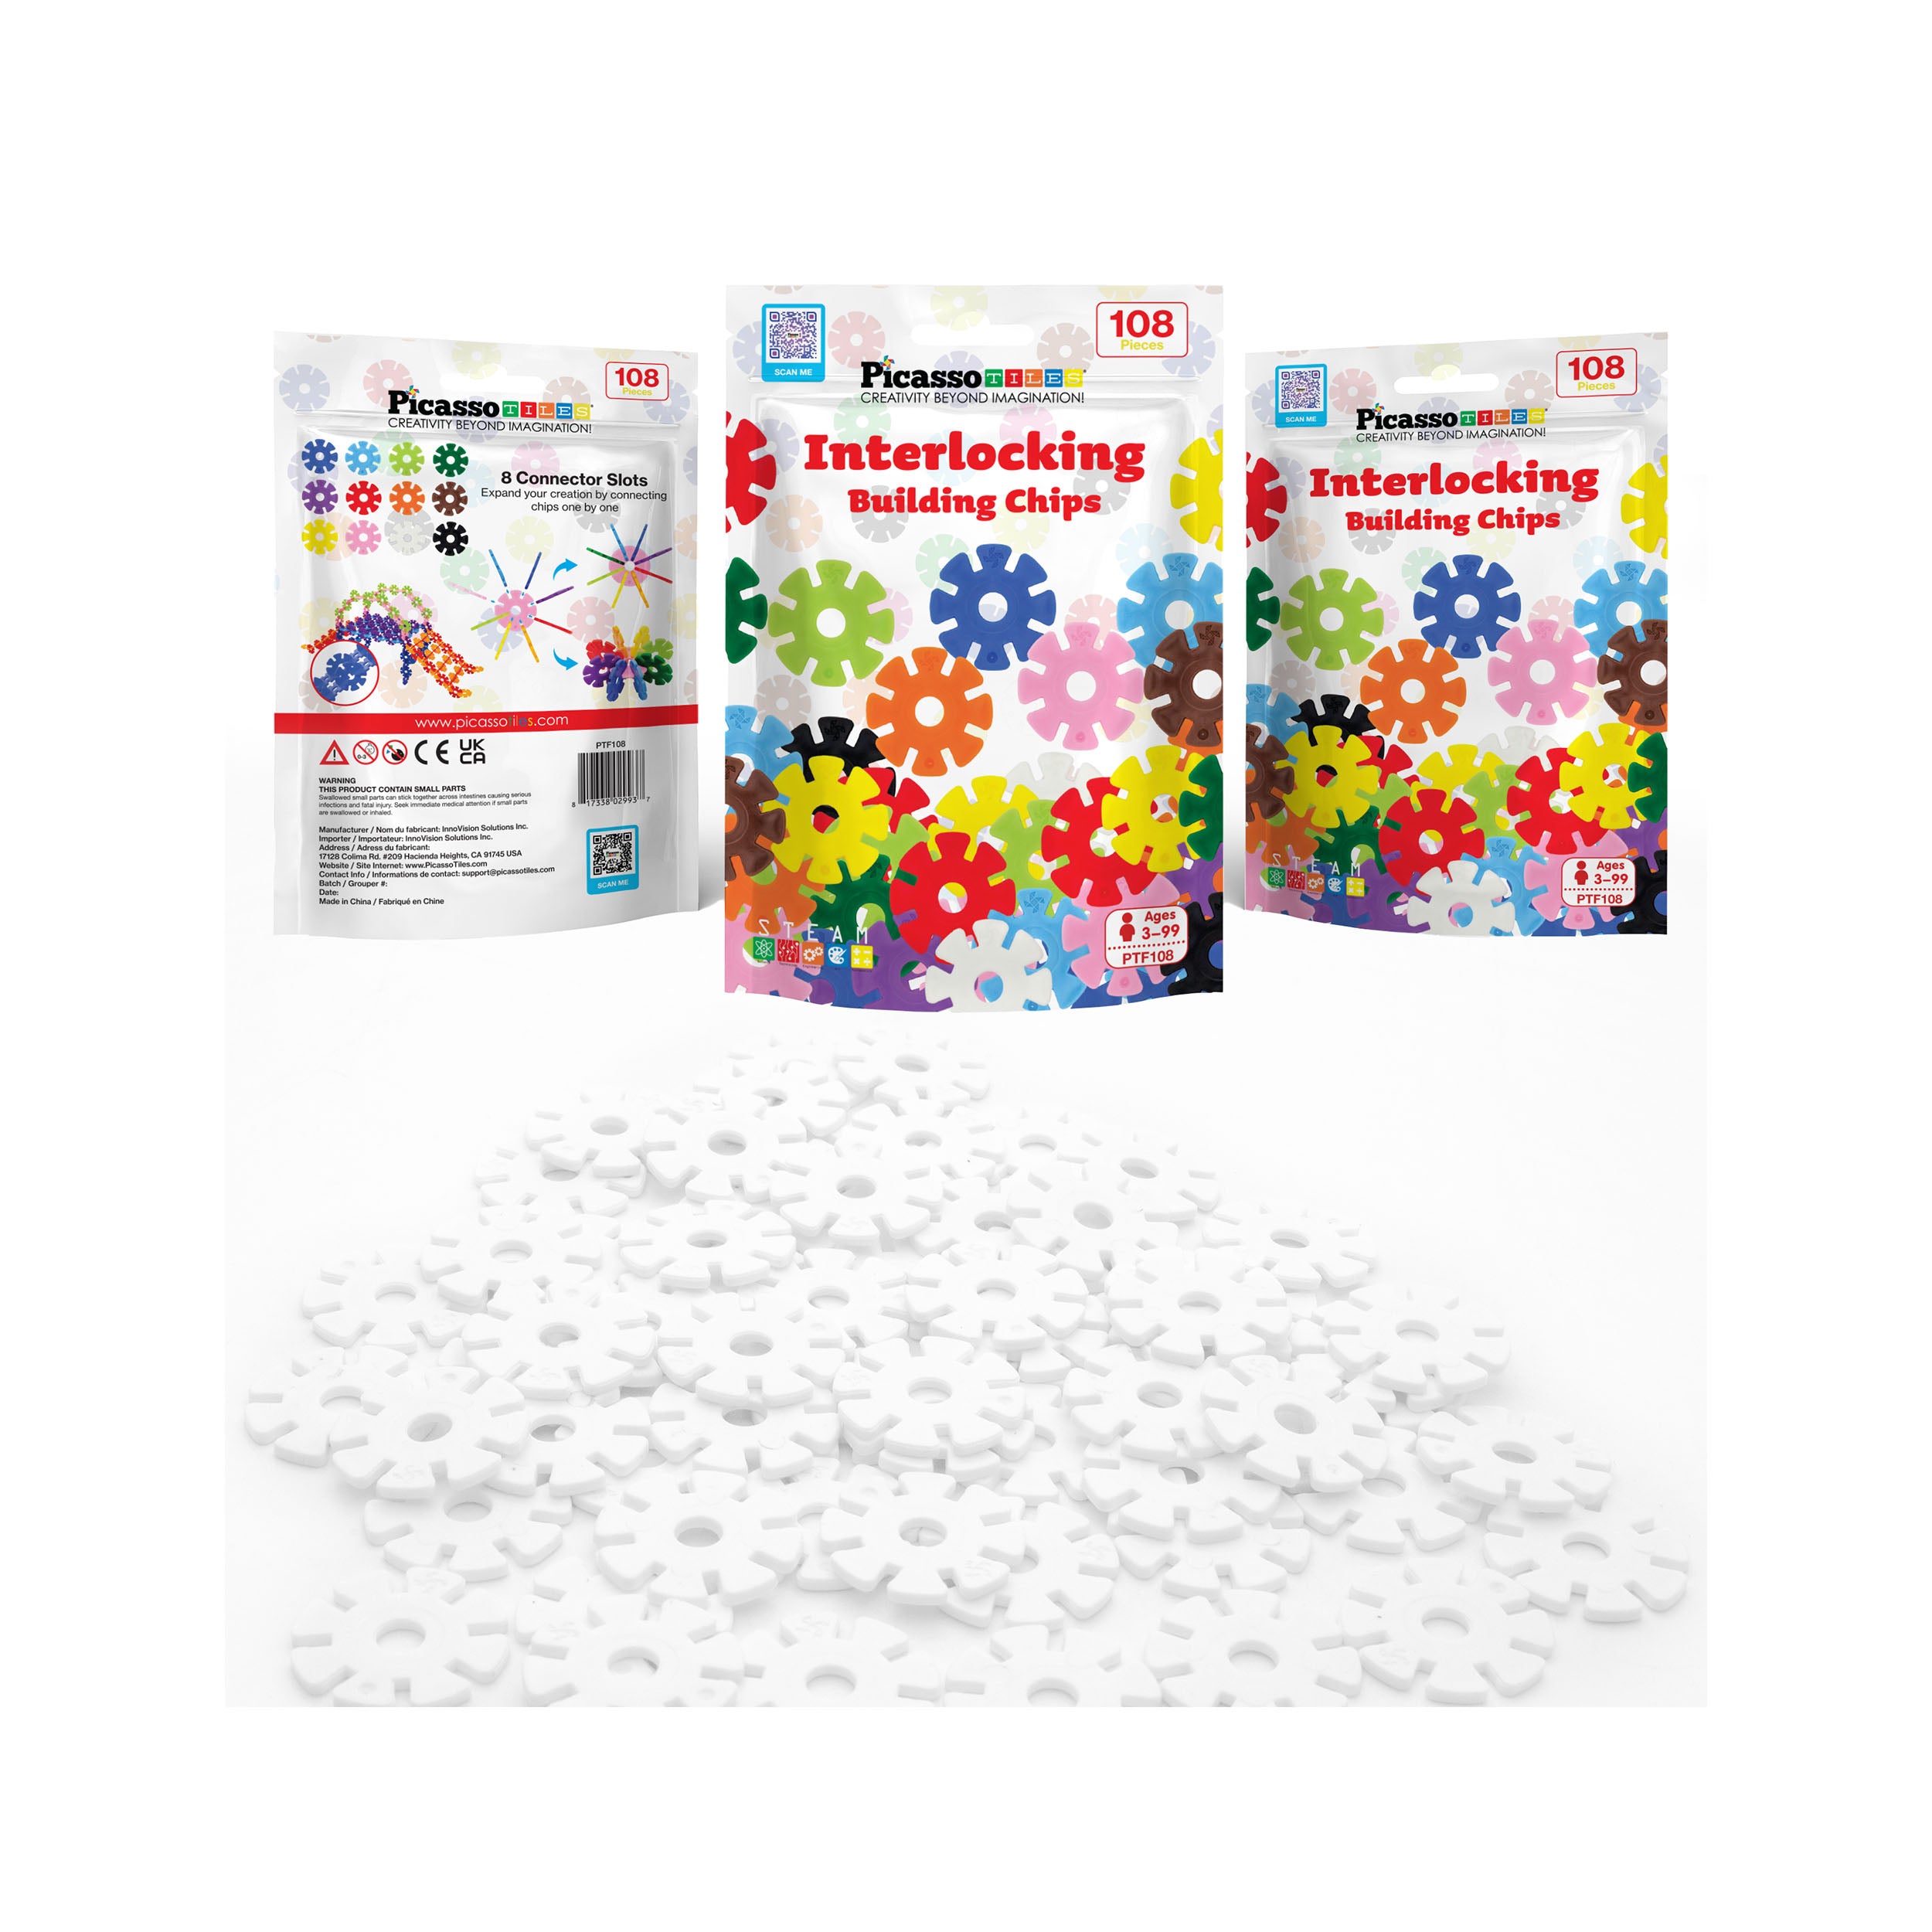 PicassoTiles Building Chip Interlocking Disc Construction Blocks in Color White